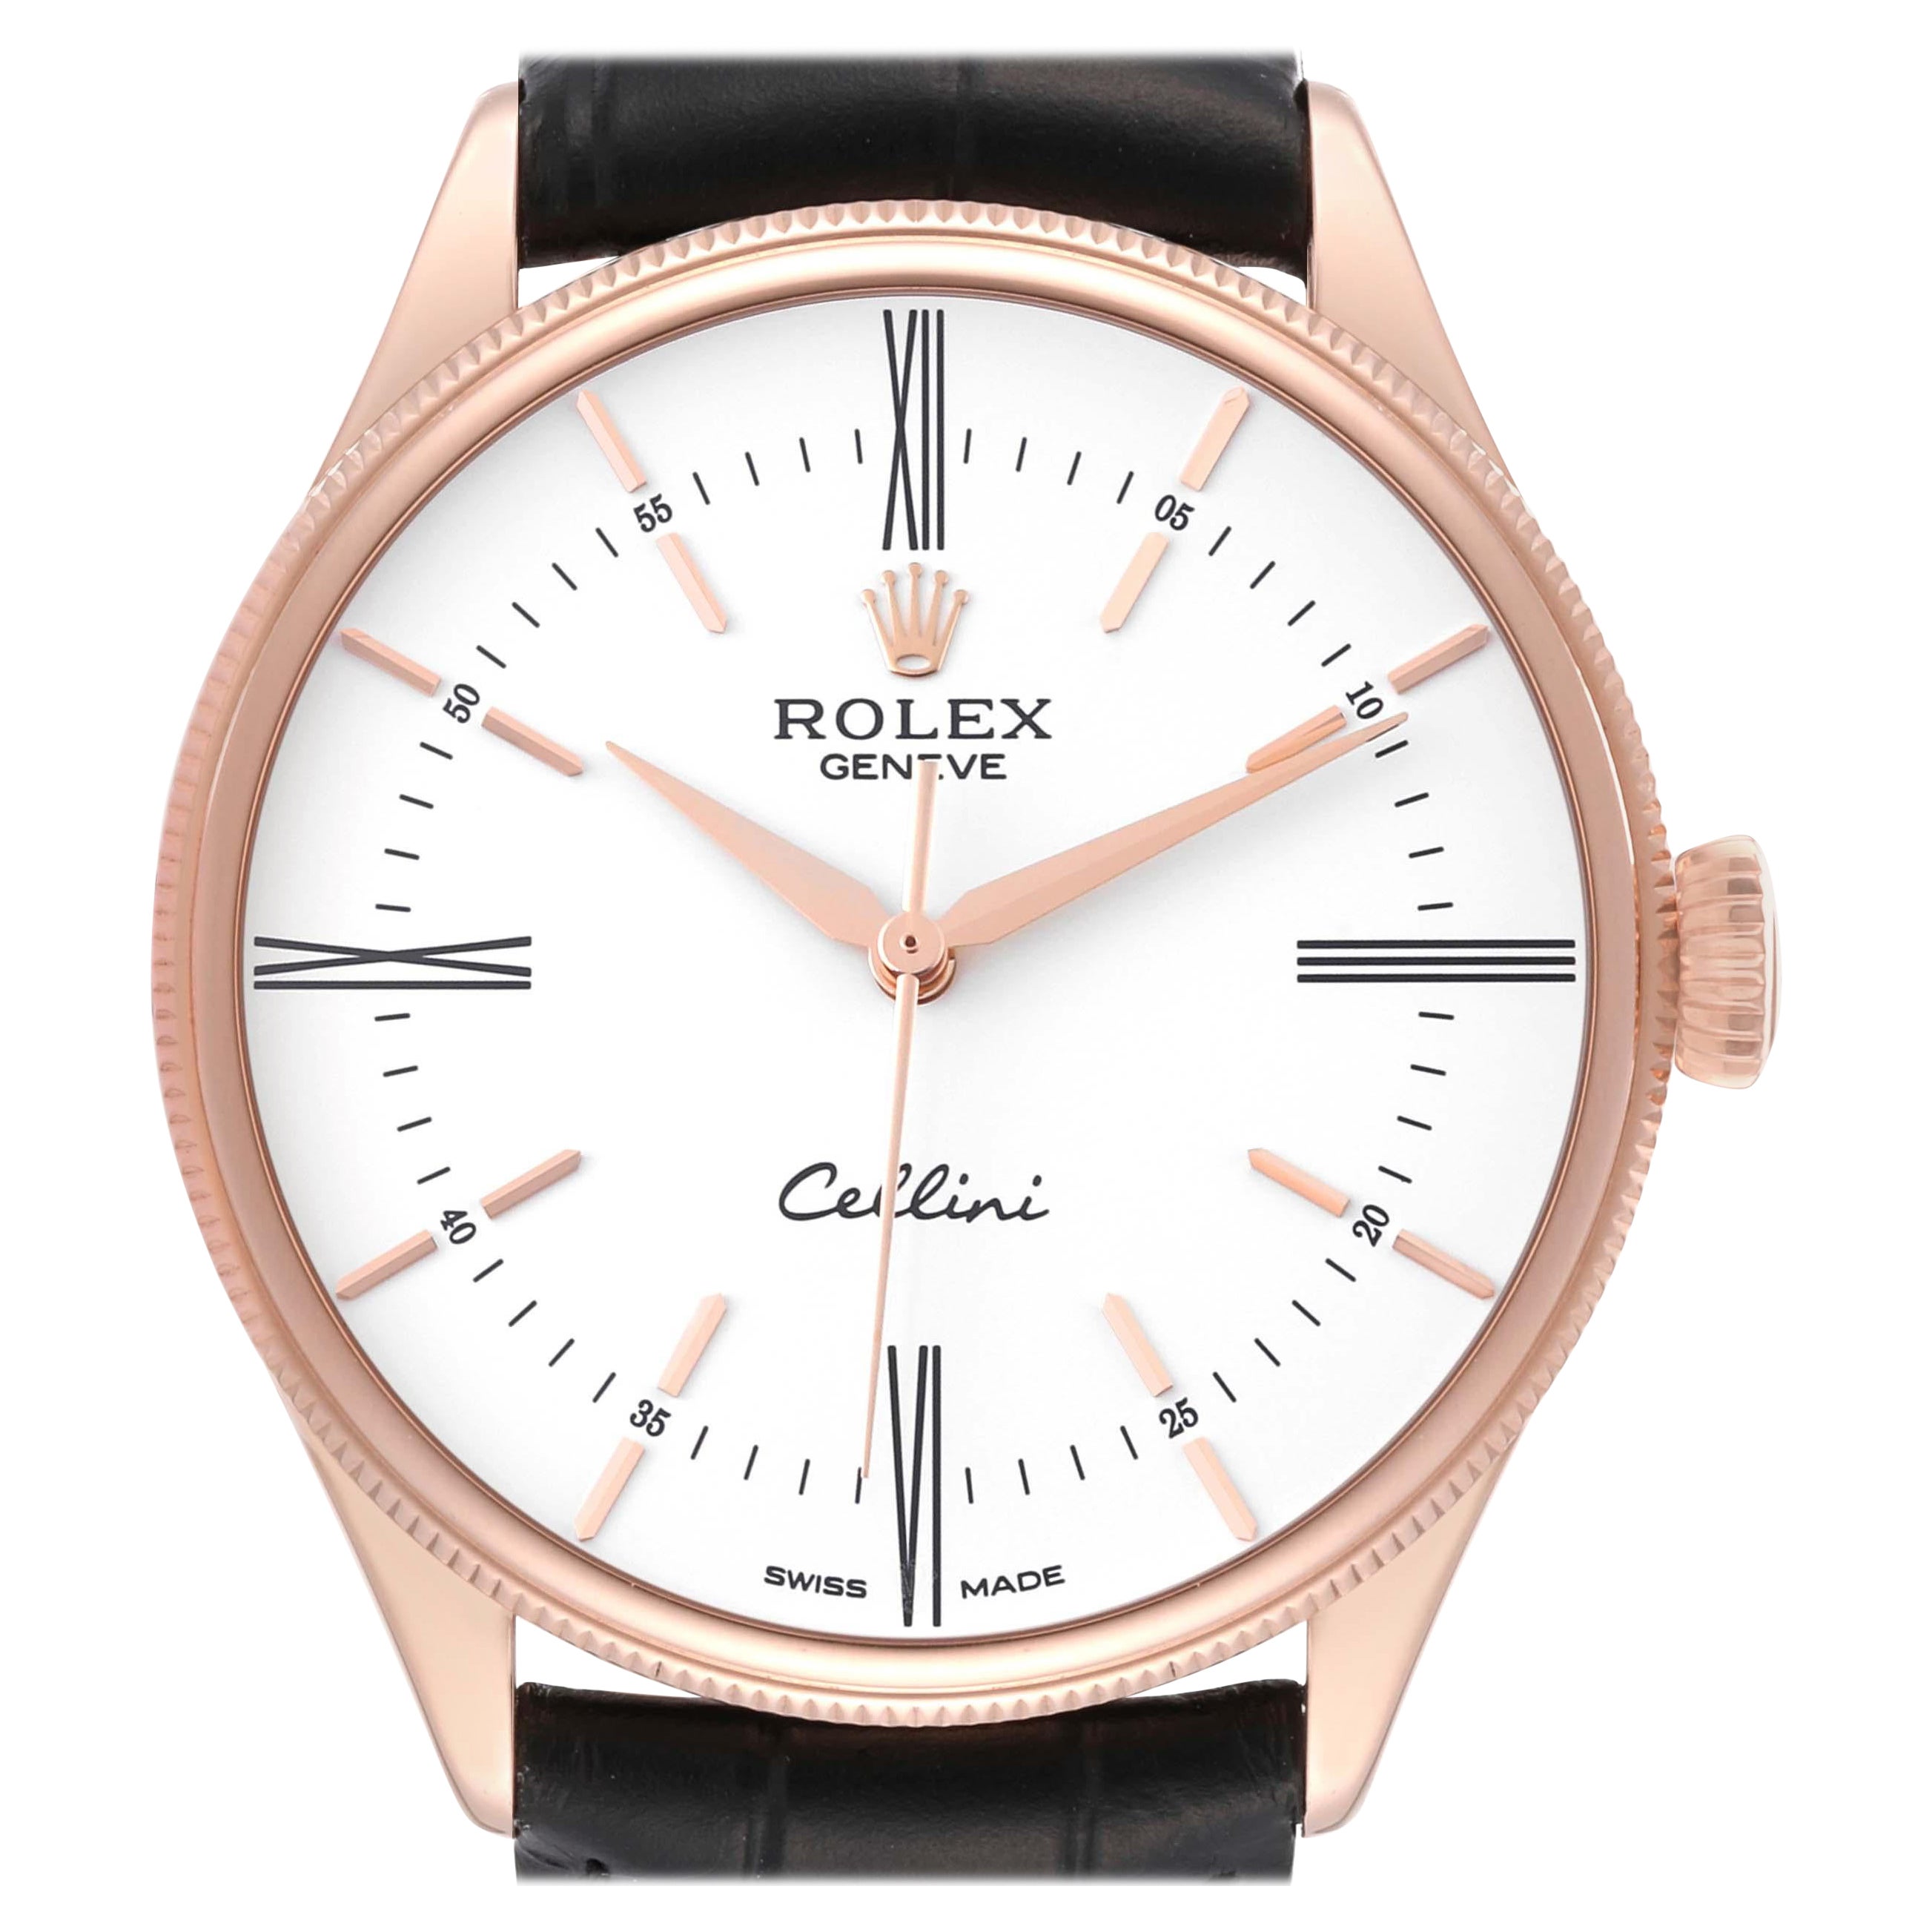 Rolex Cellini Time White Dial Rose Gold Mens Watch 50505 For Sale